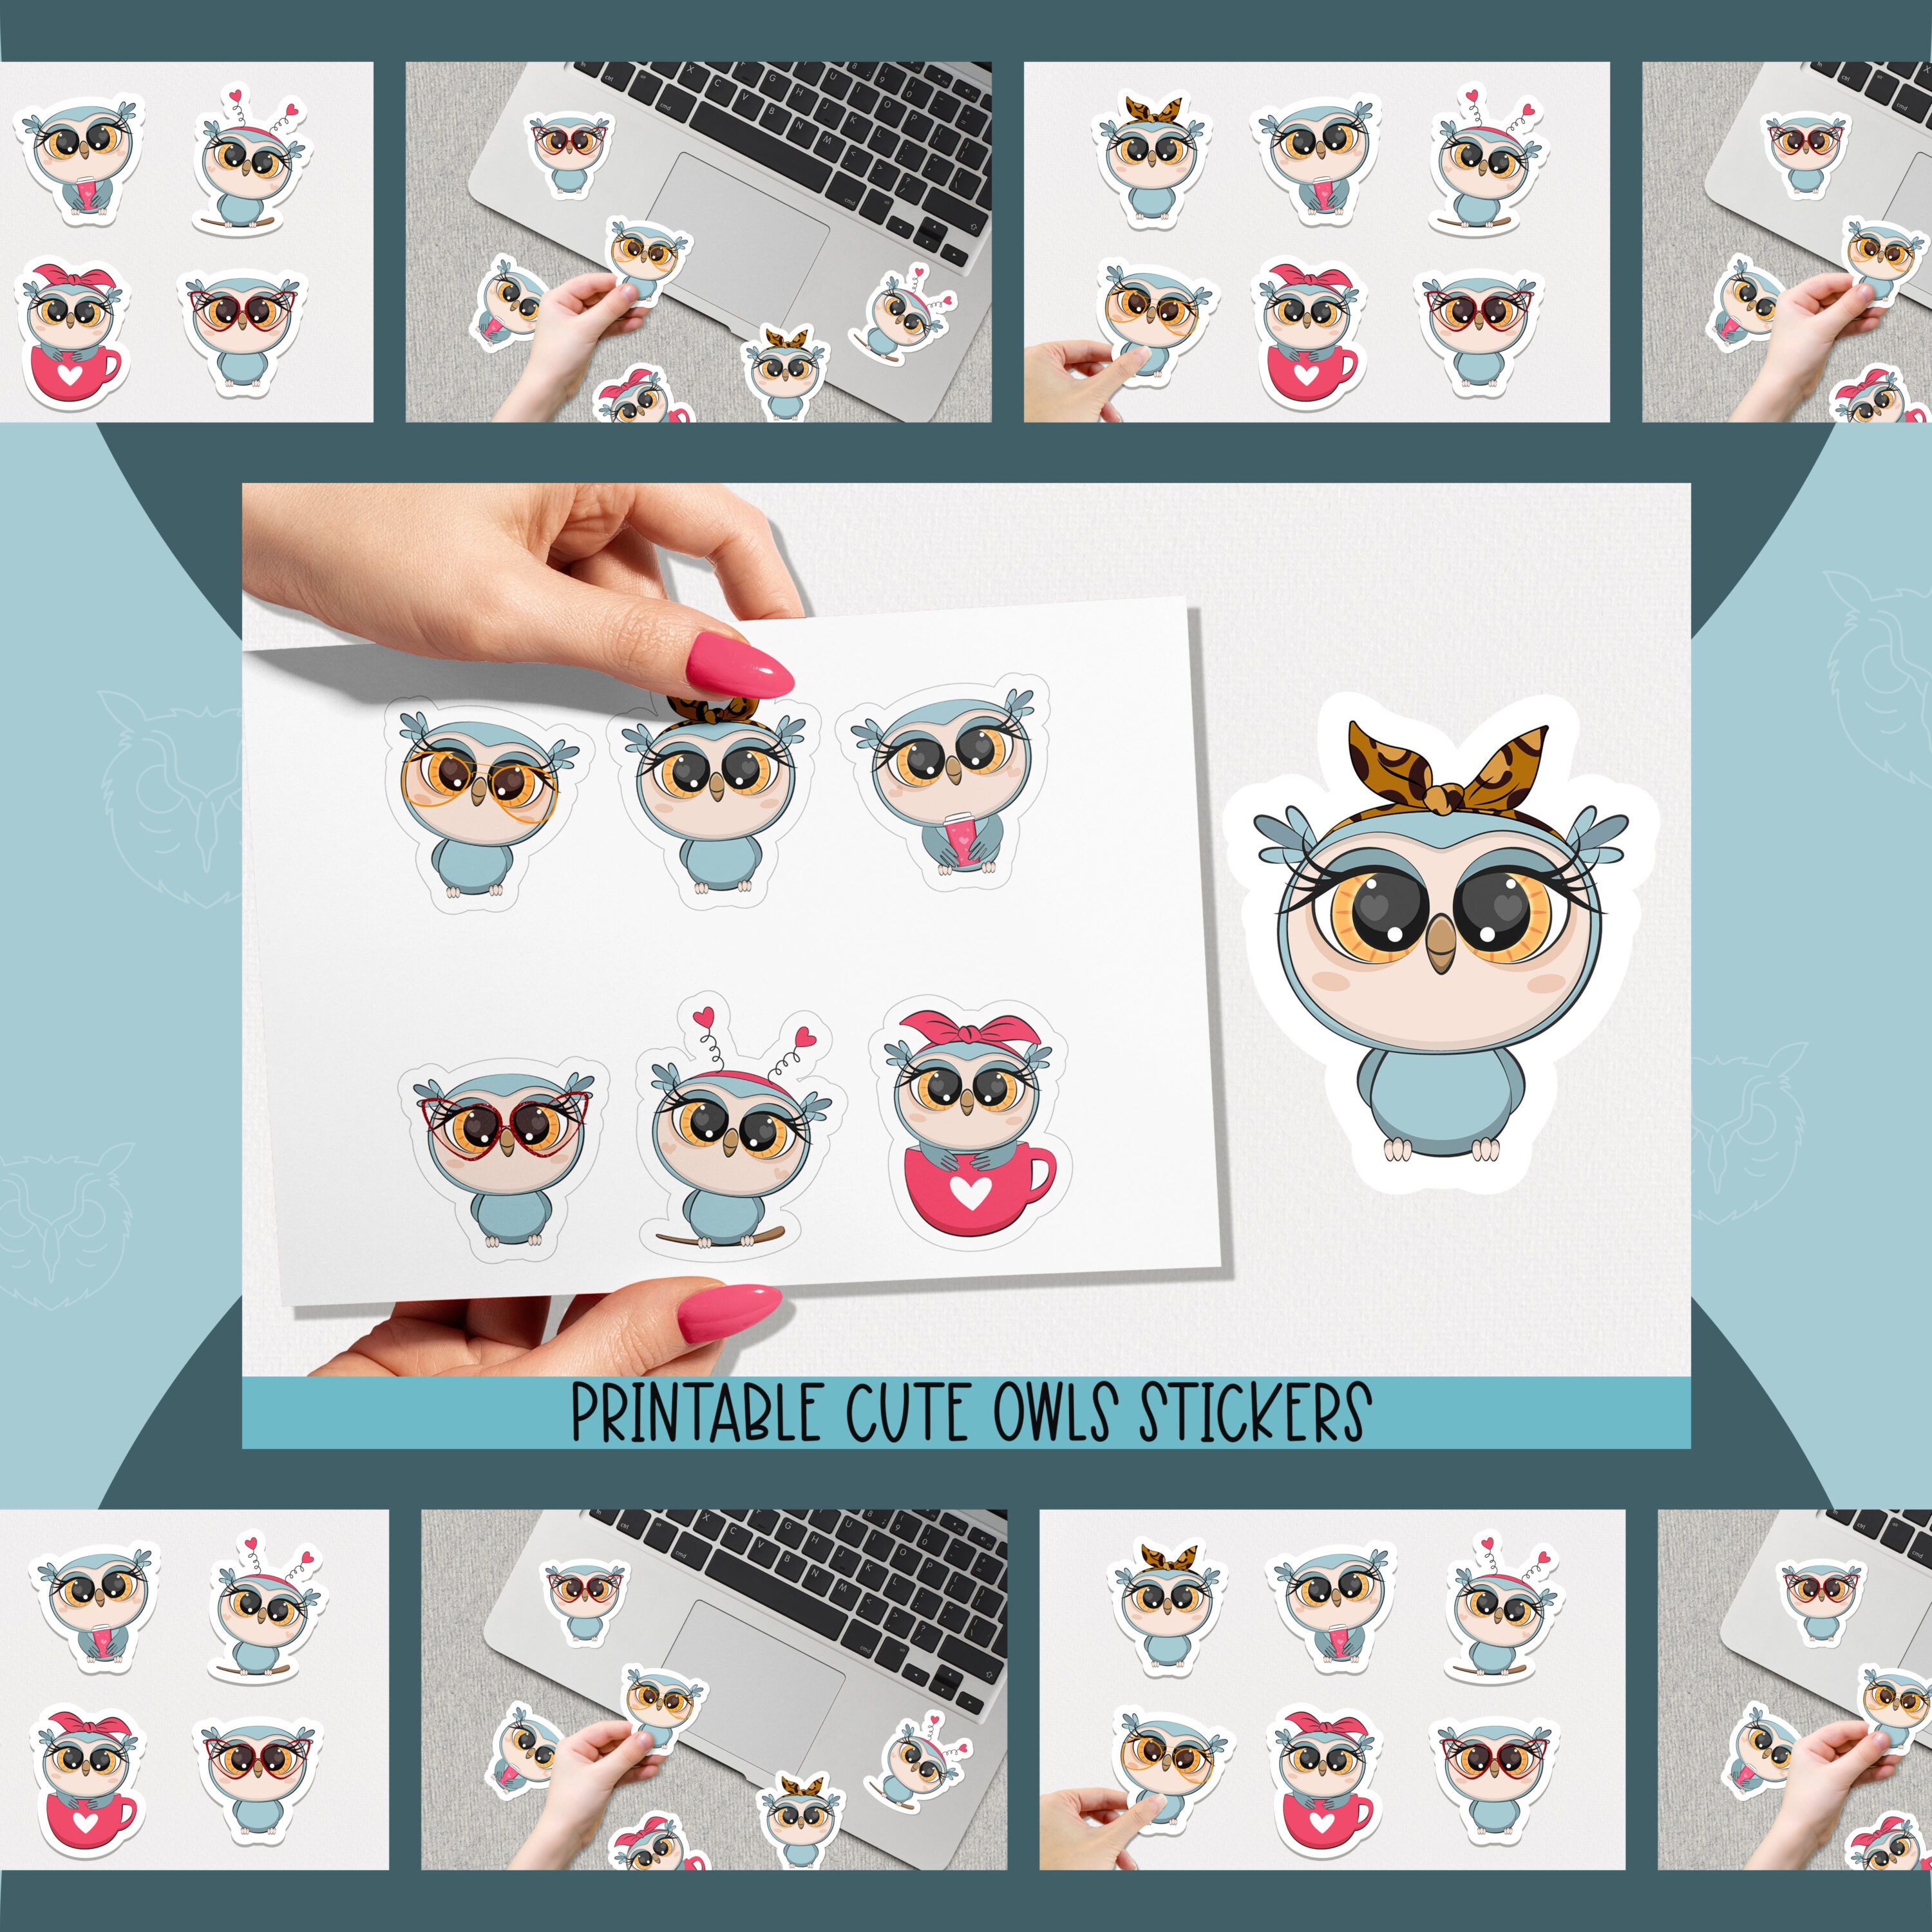 Preview cute owls printable stickers.